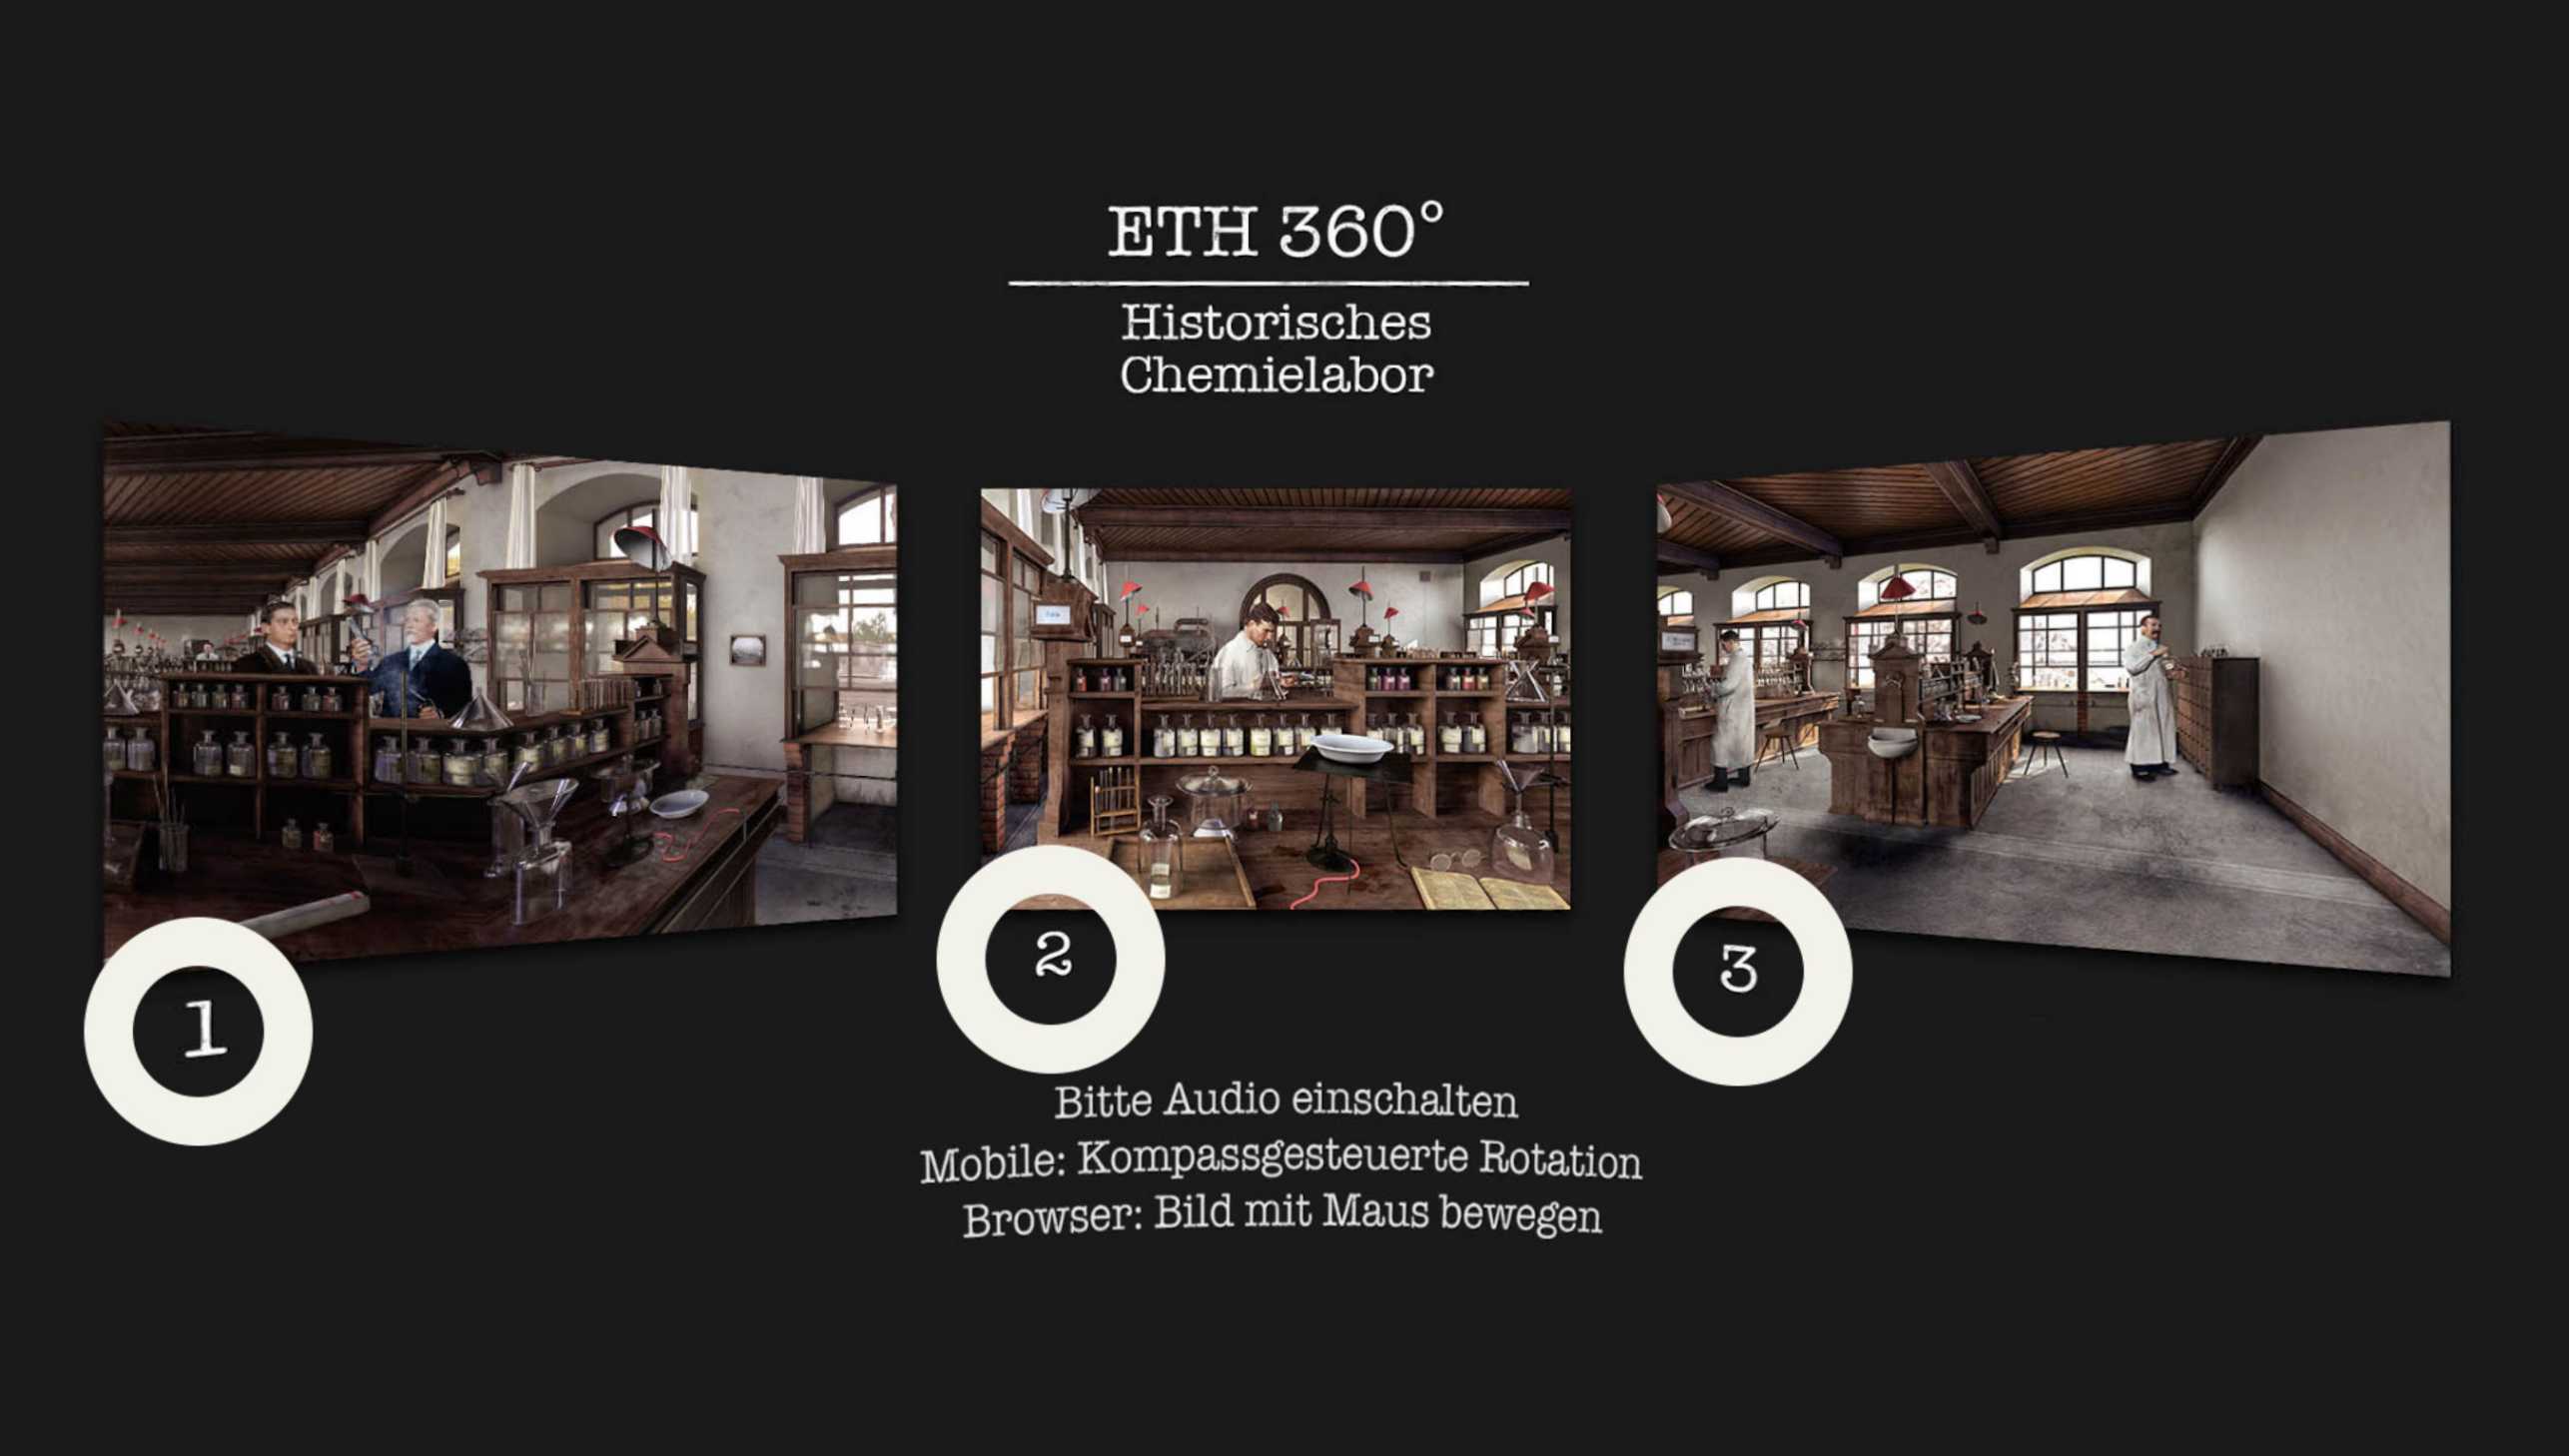 3D tour of ETH's historic chemistry laboratory from 1900